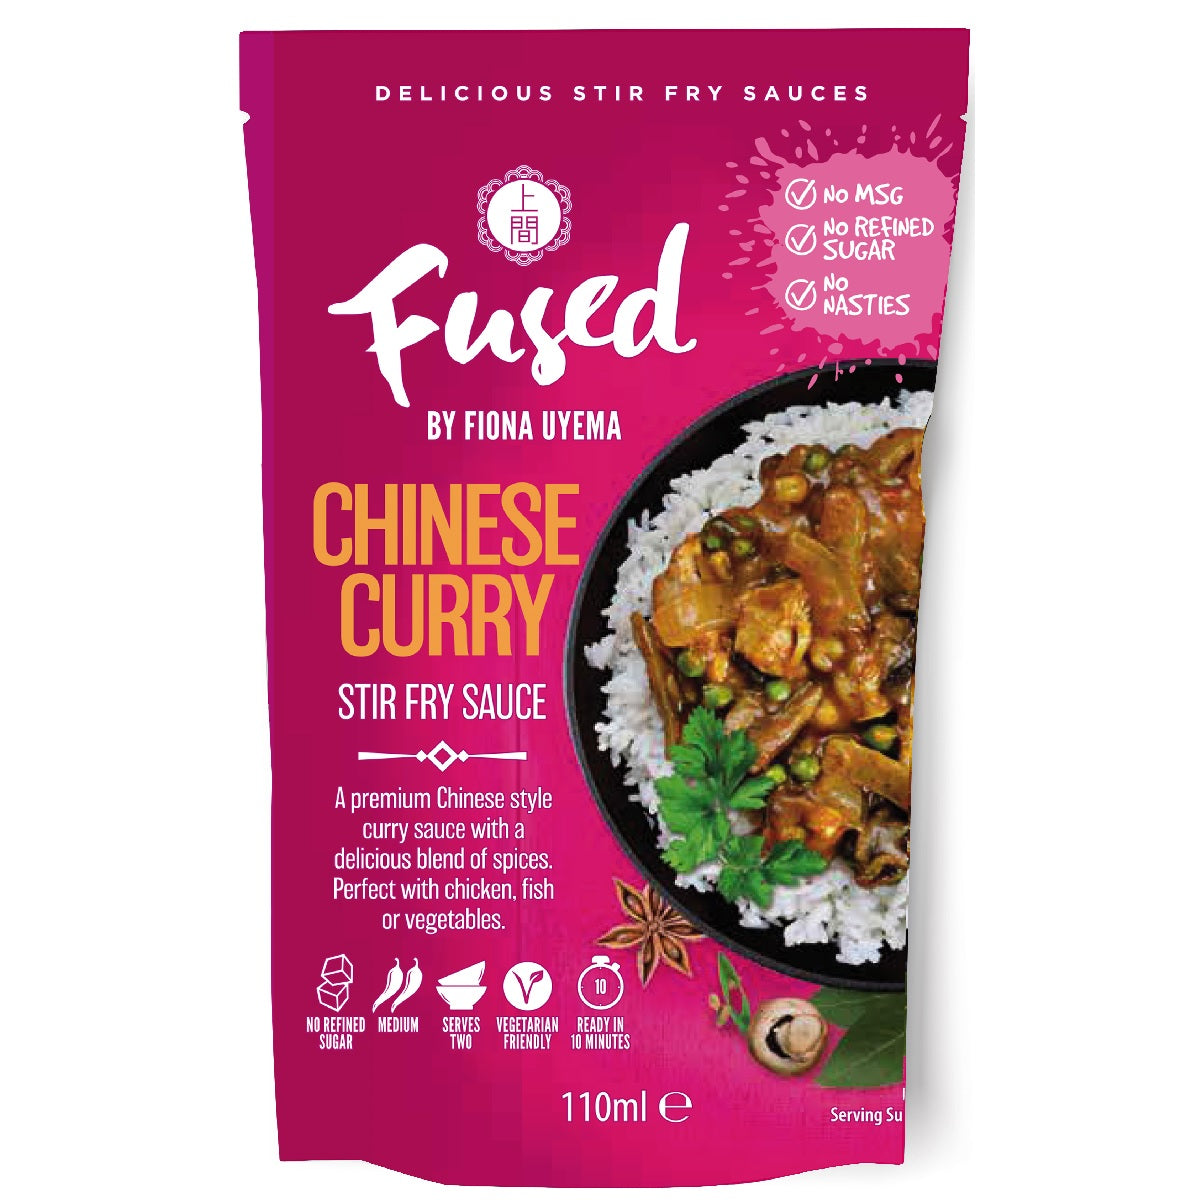 Fused by Fiona Uyema Chinese Curry Stir Fry Sauce 120g